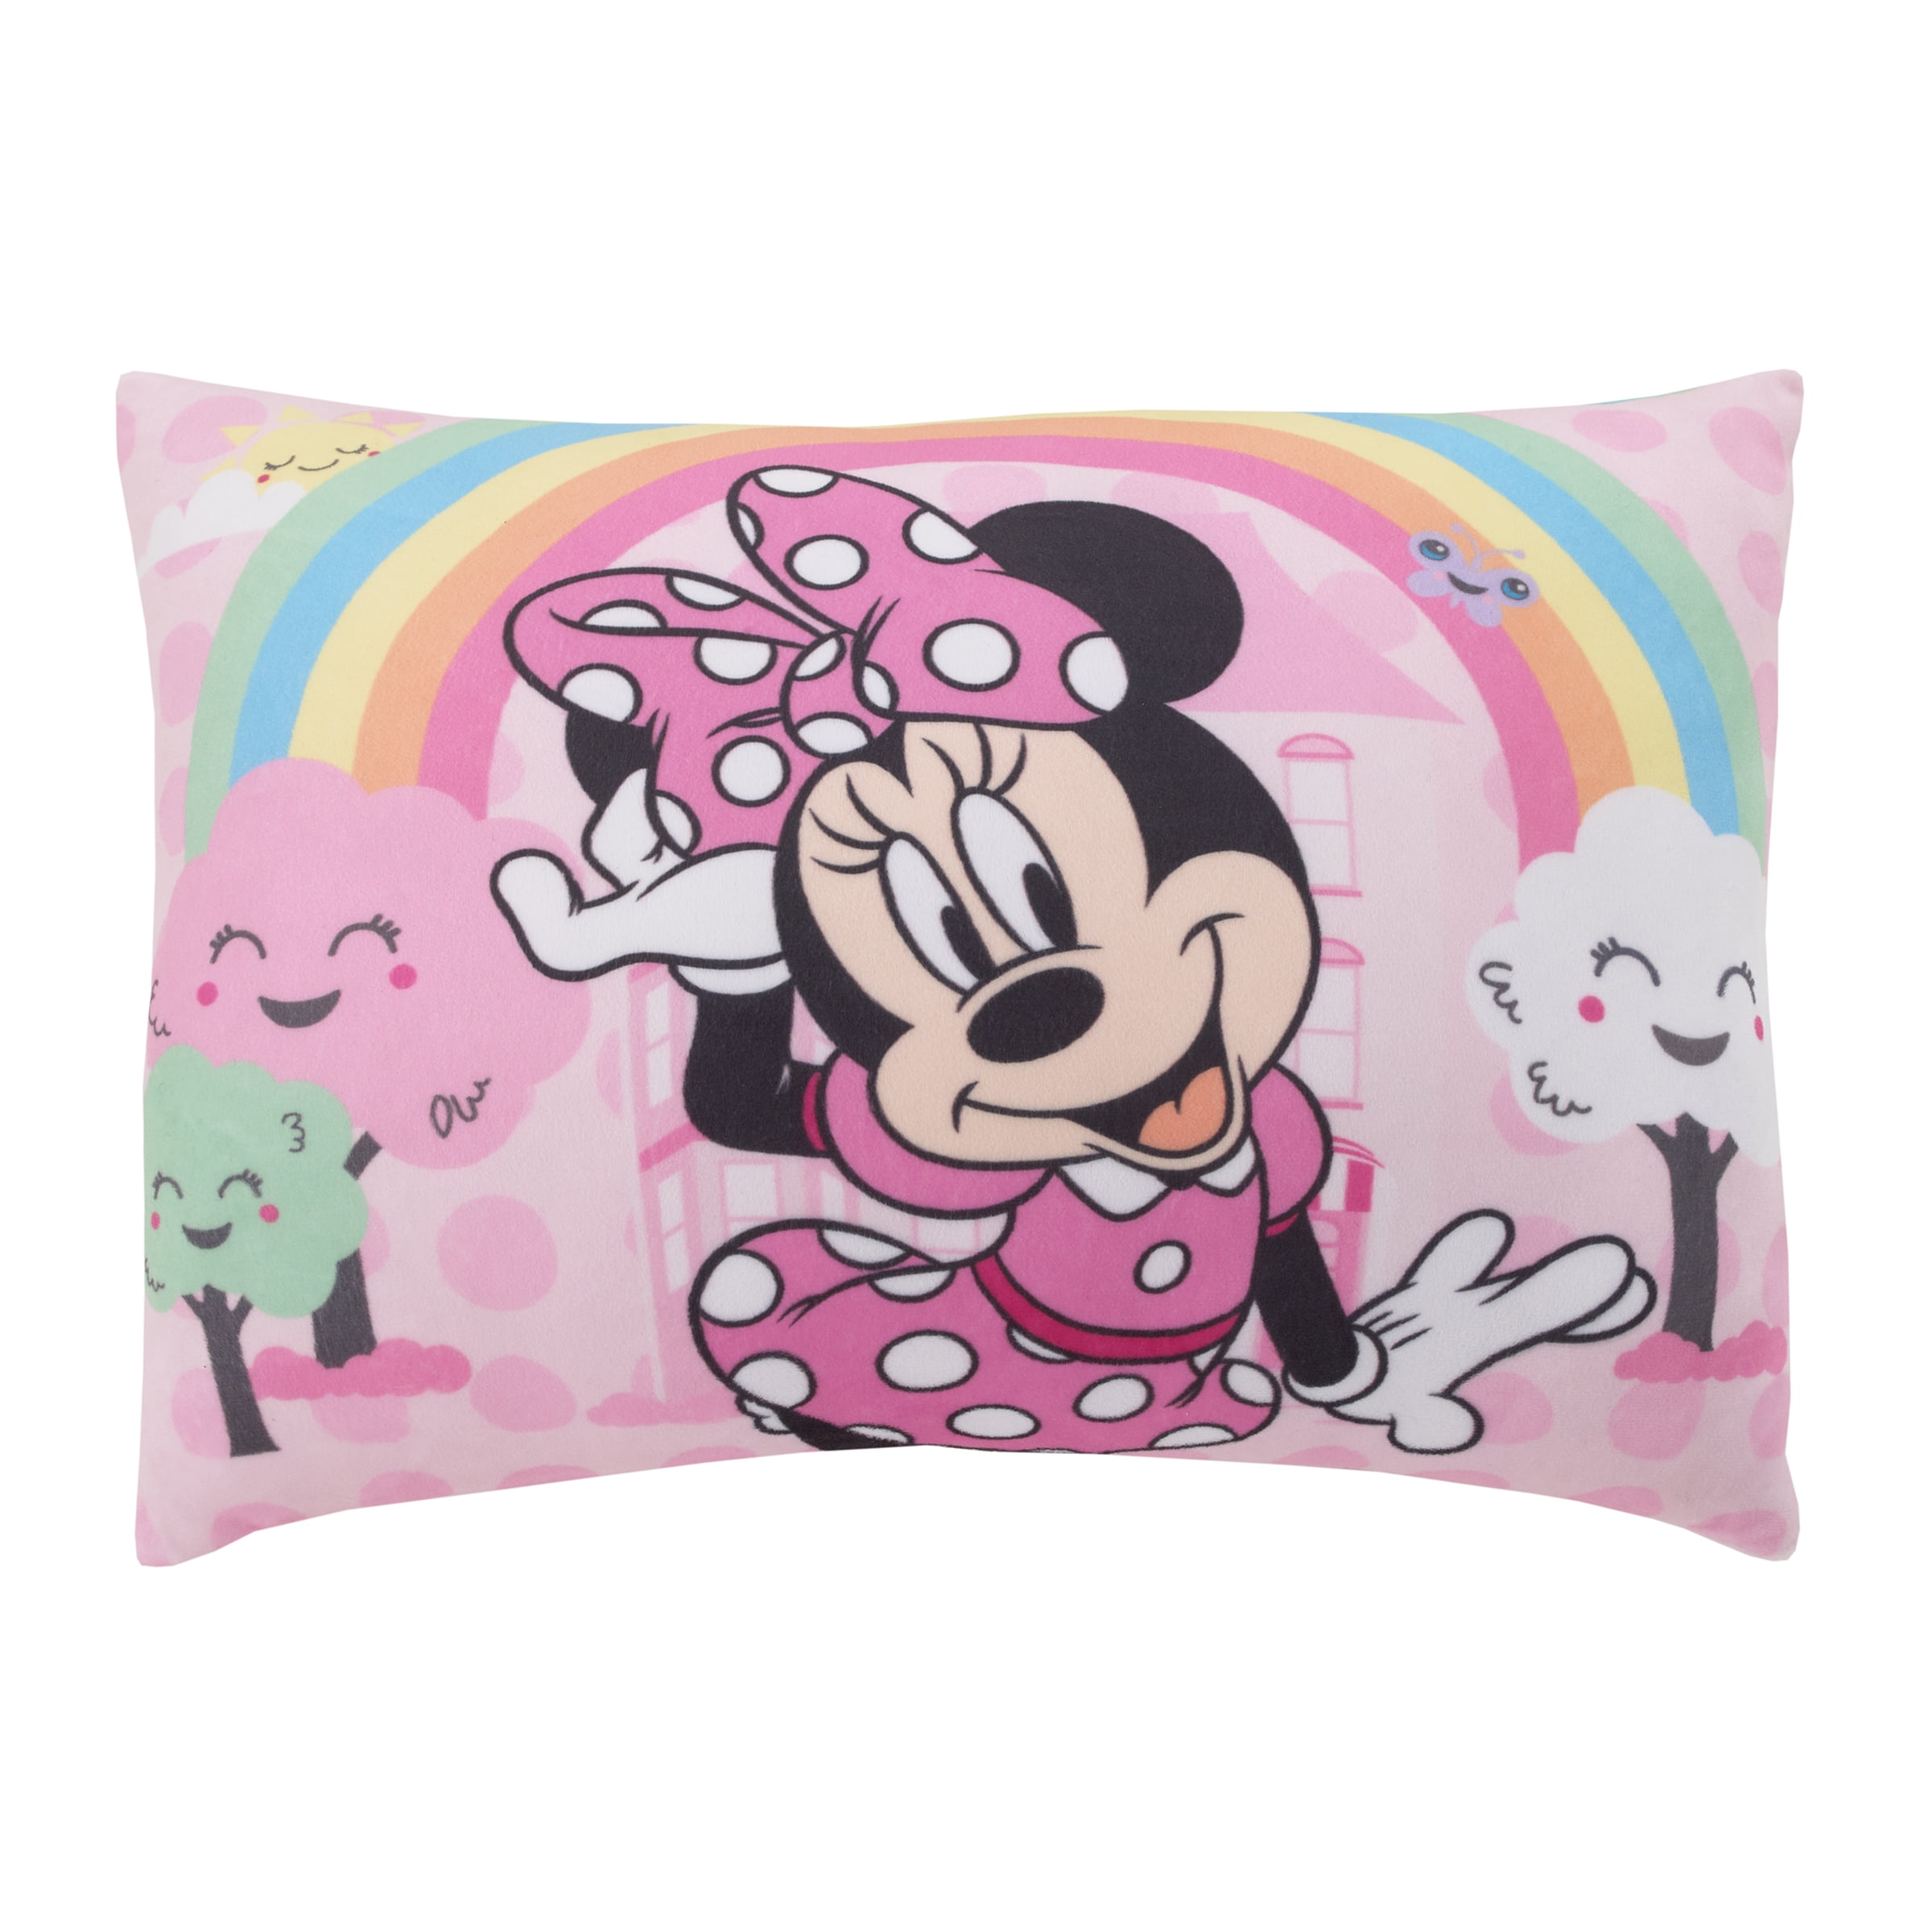 Disney Minnie Mouse Dots Are The Black Pillow Buddy Pink 0 L for sale online 